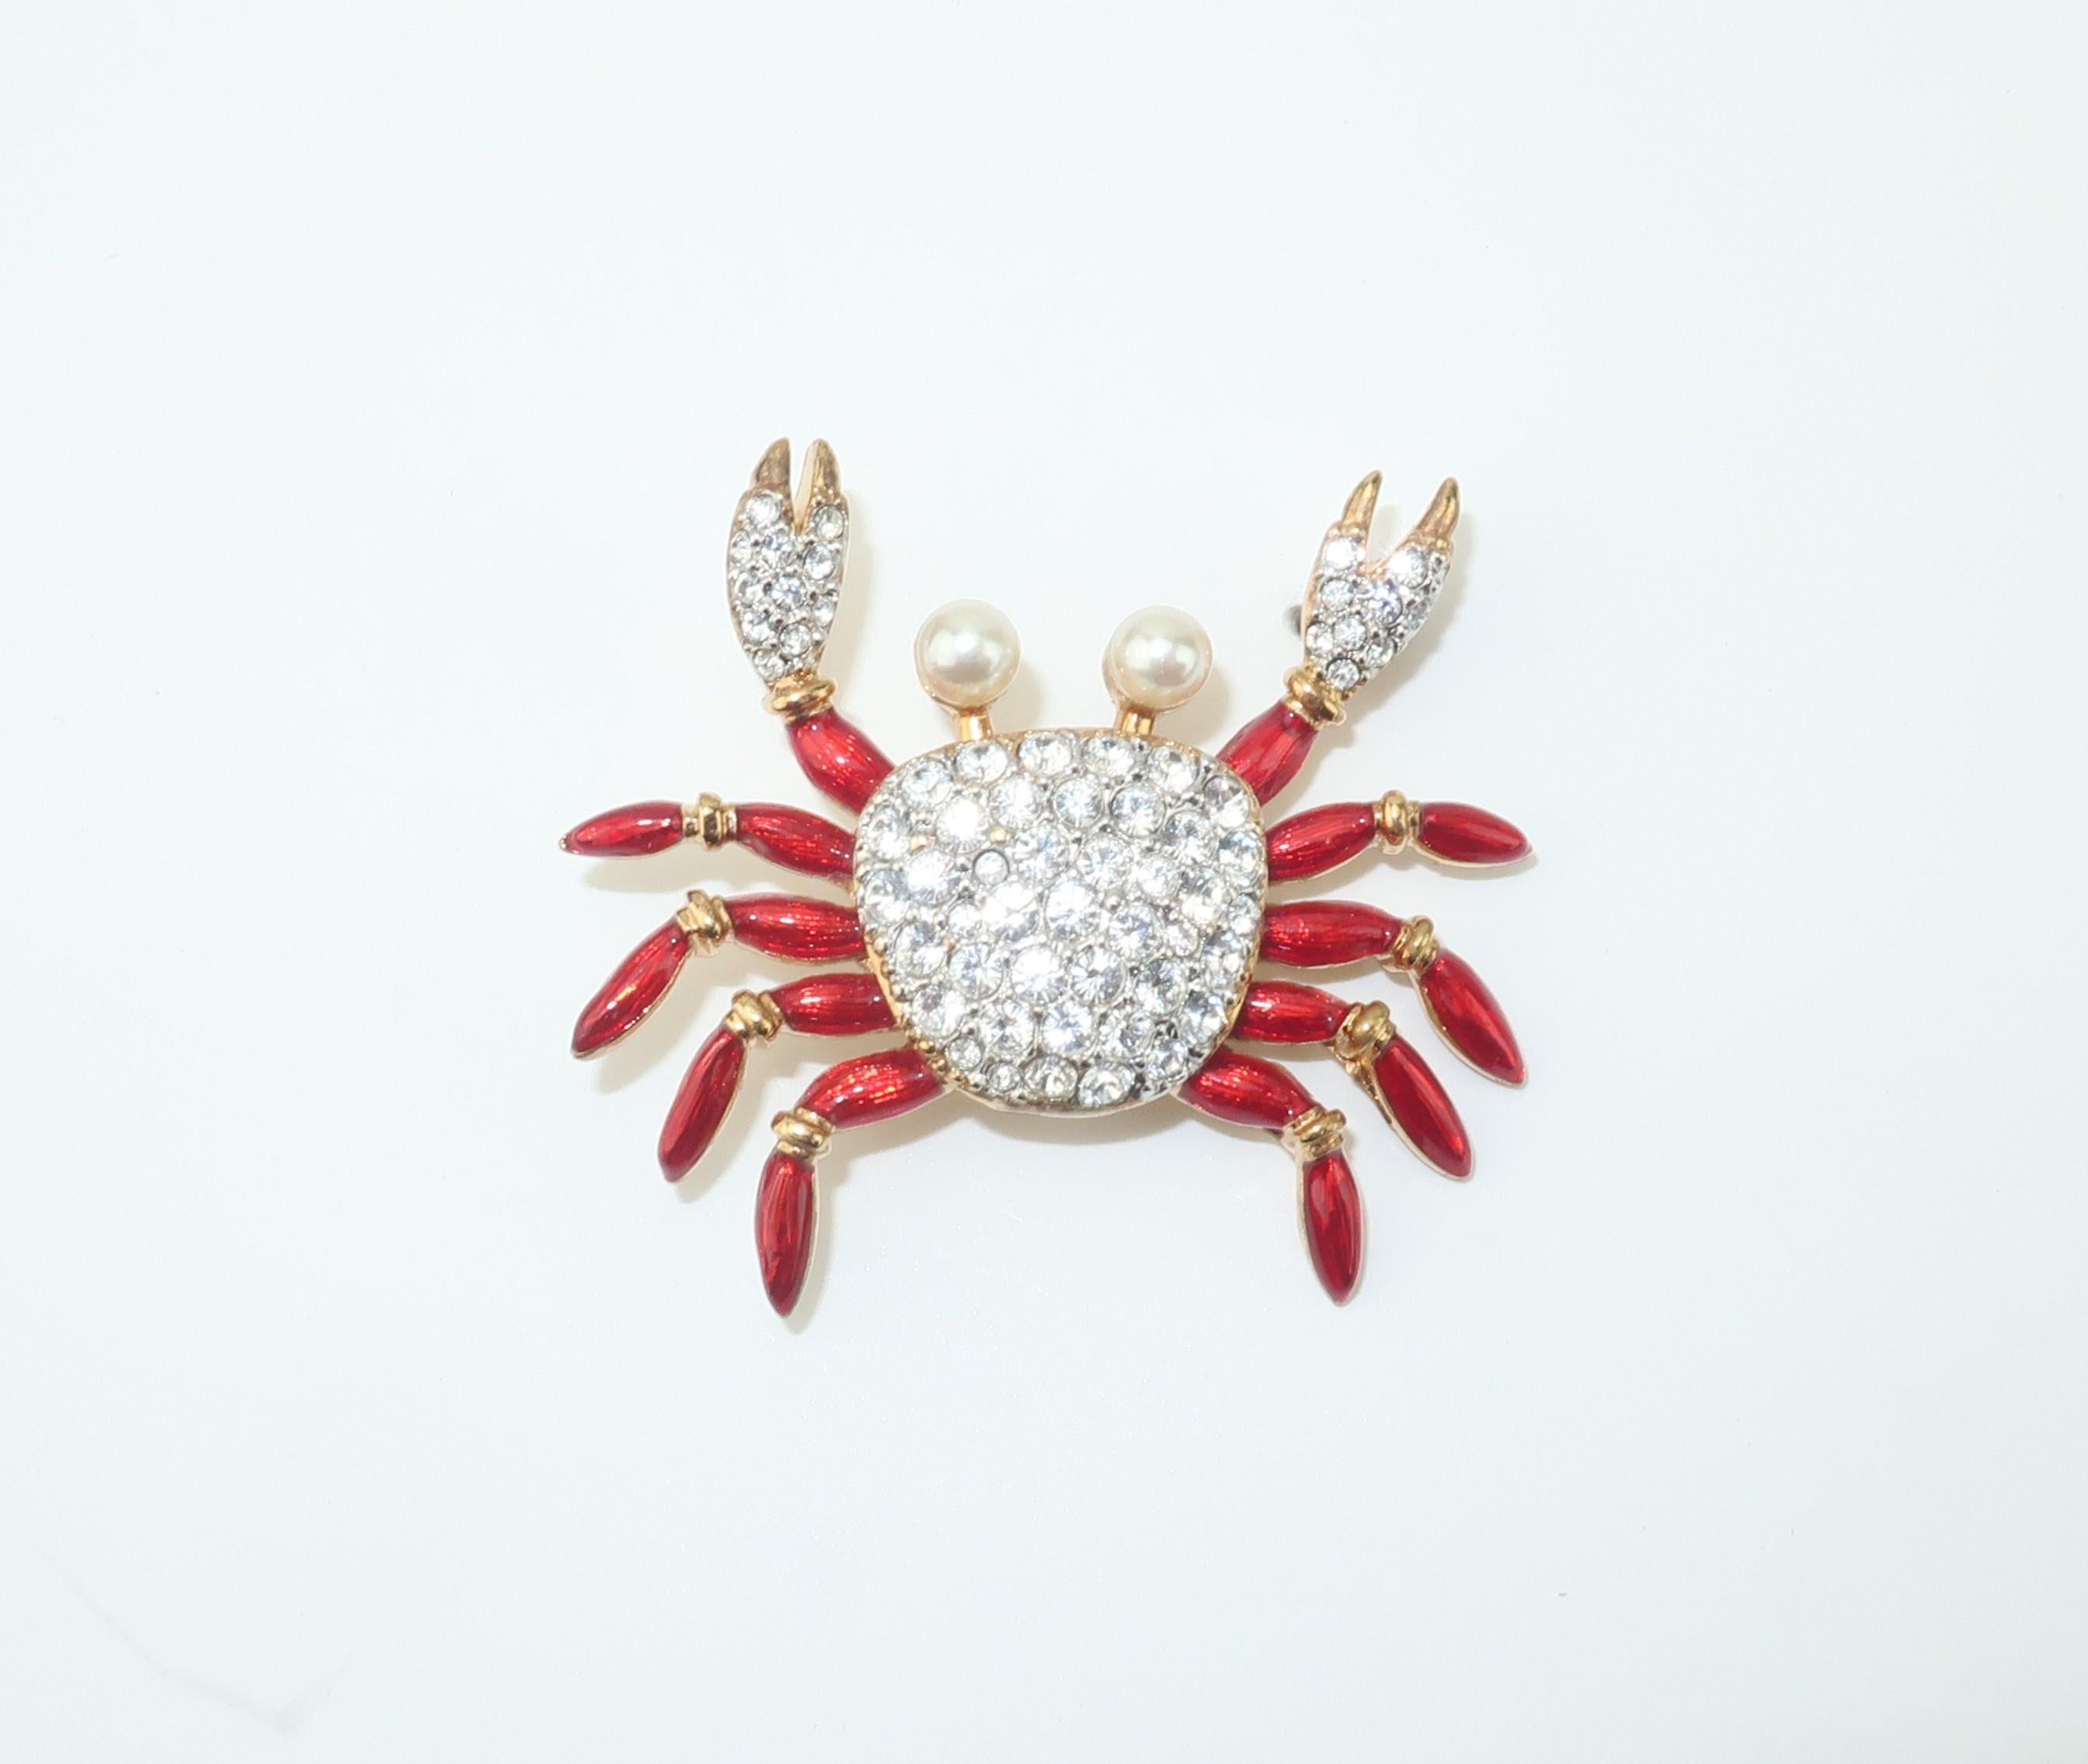 An adorable Swarovski crab brooch loaded with personality and adorned with brilliant crystals, red enamel and faux pearls.  Set in a gold tone metal and outfitted with a straight pin and safety catch.  Signed with the Swarovski iconic swan logo. 